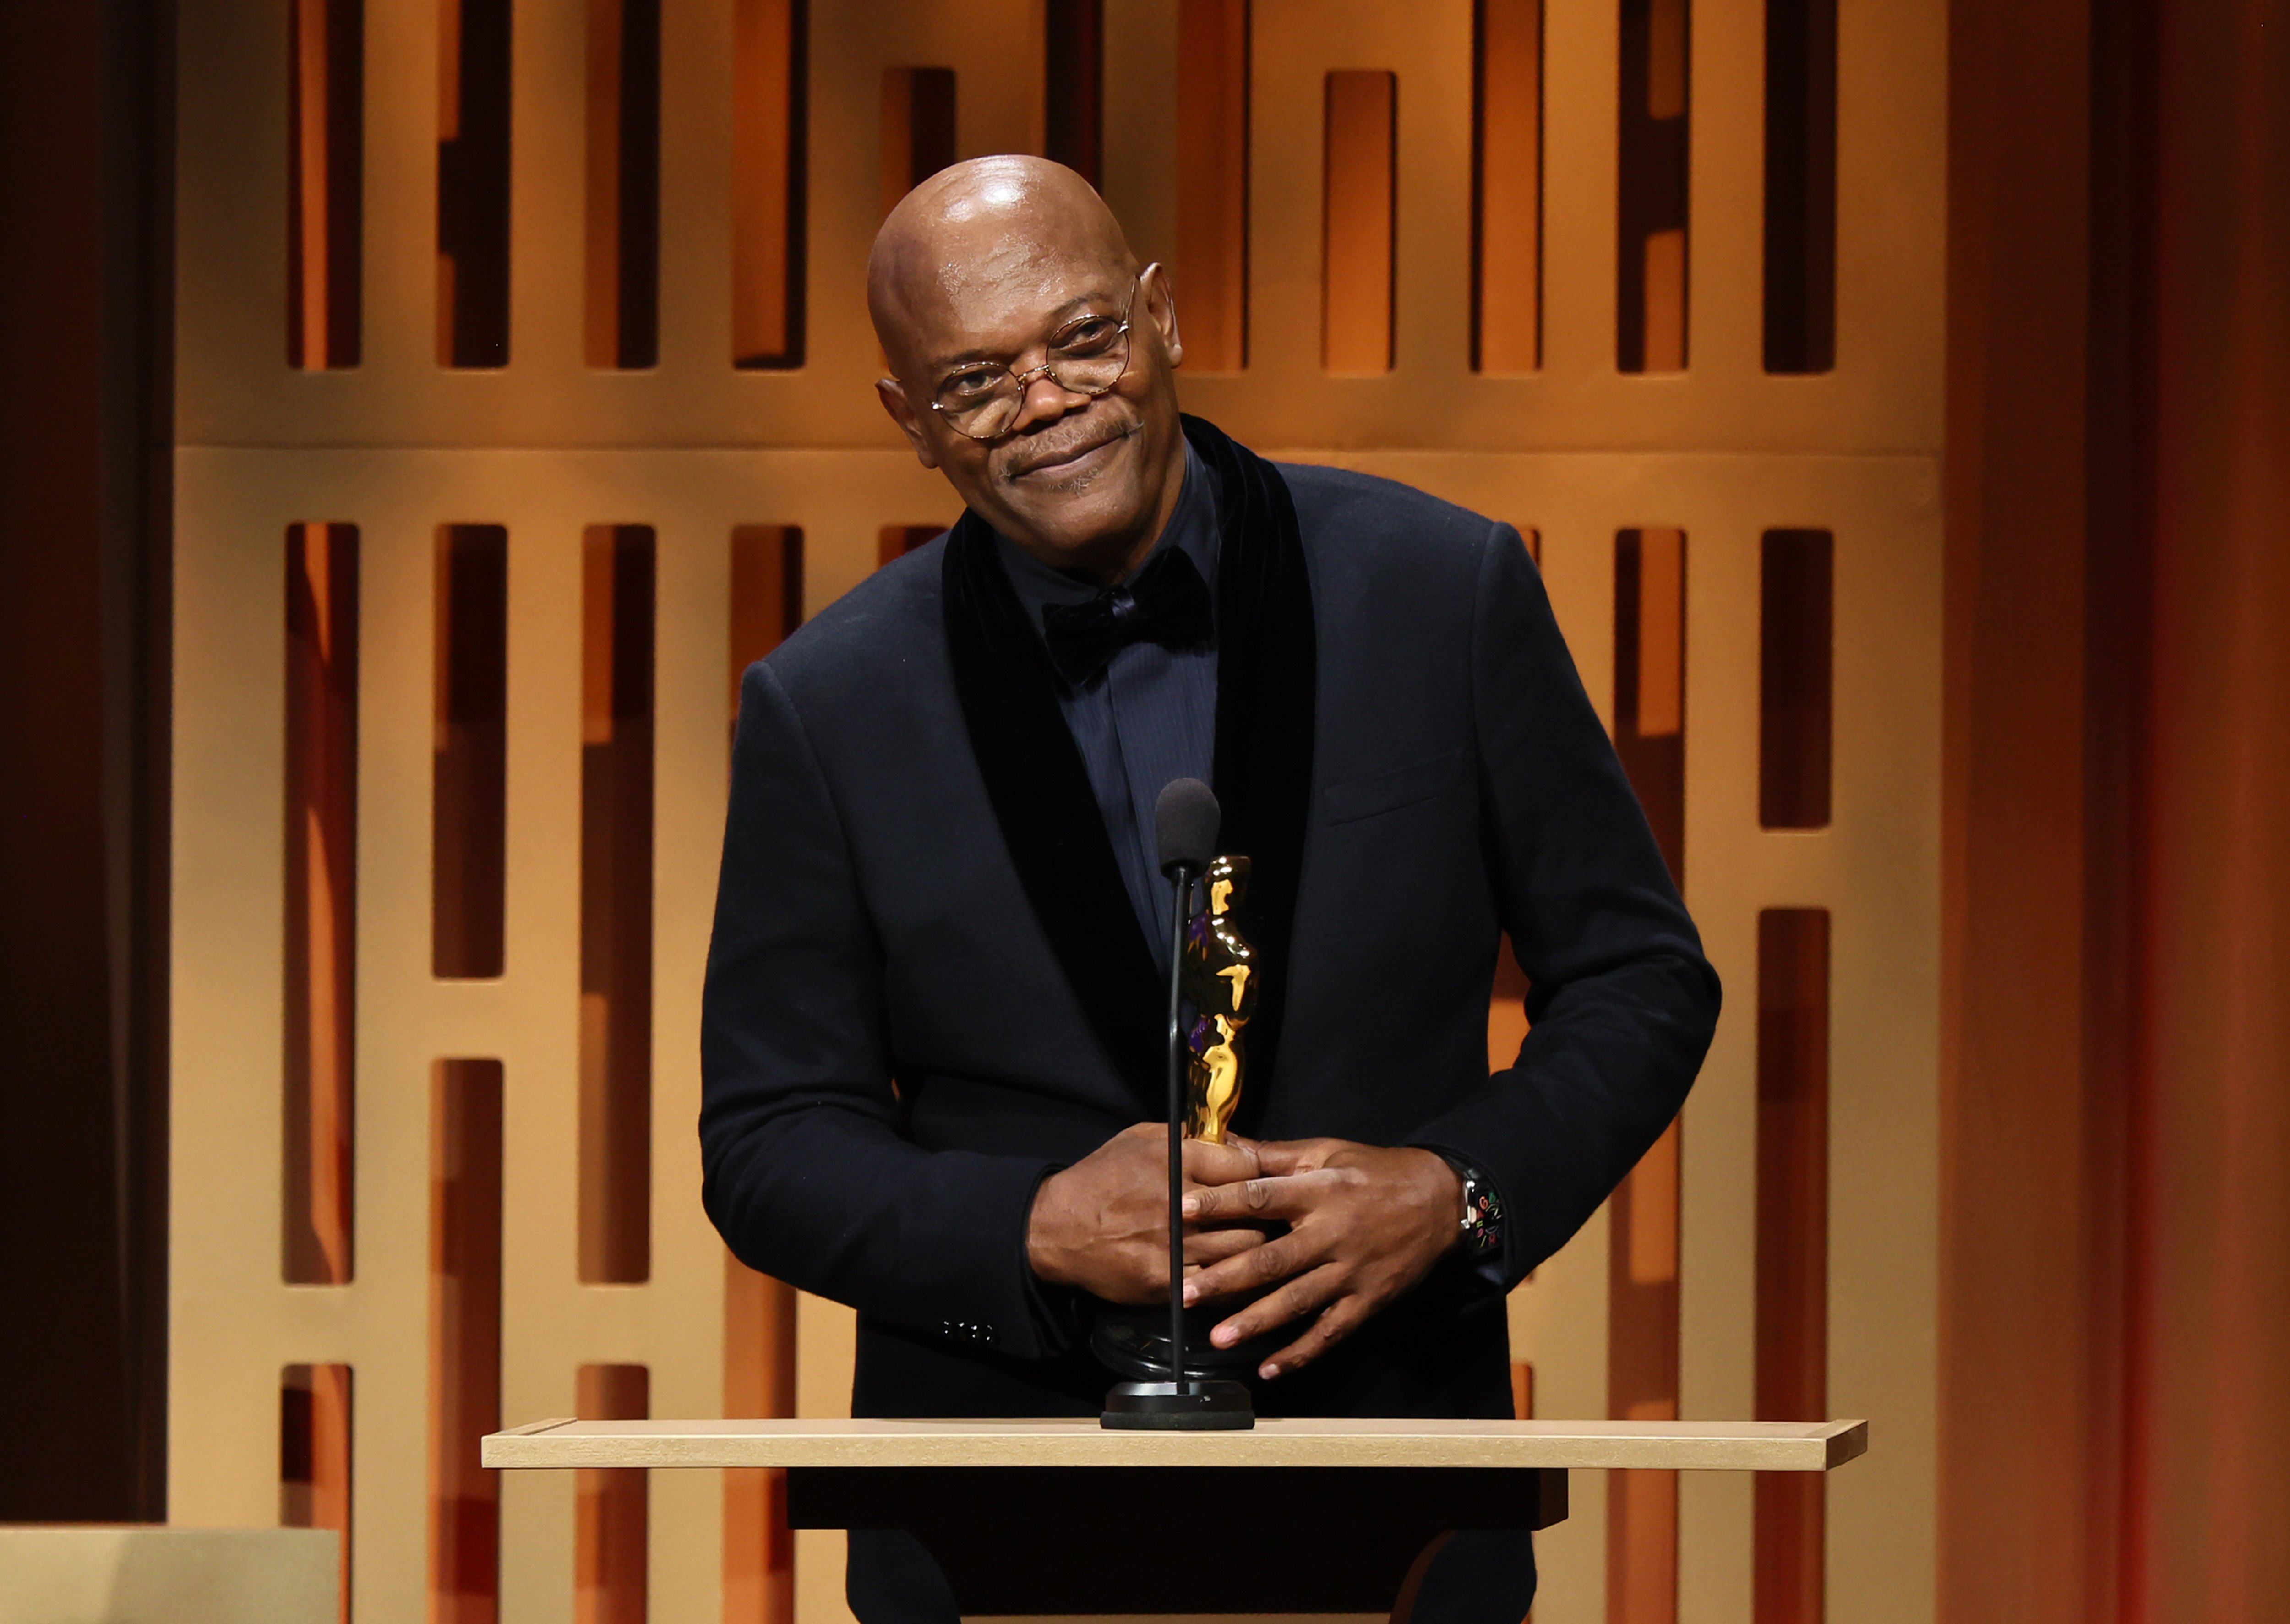 Marvel actor Samuel L. Jackson receives an honorary Oscar at the 2022 Governor's Awards